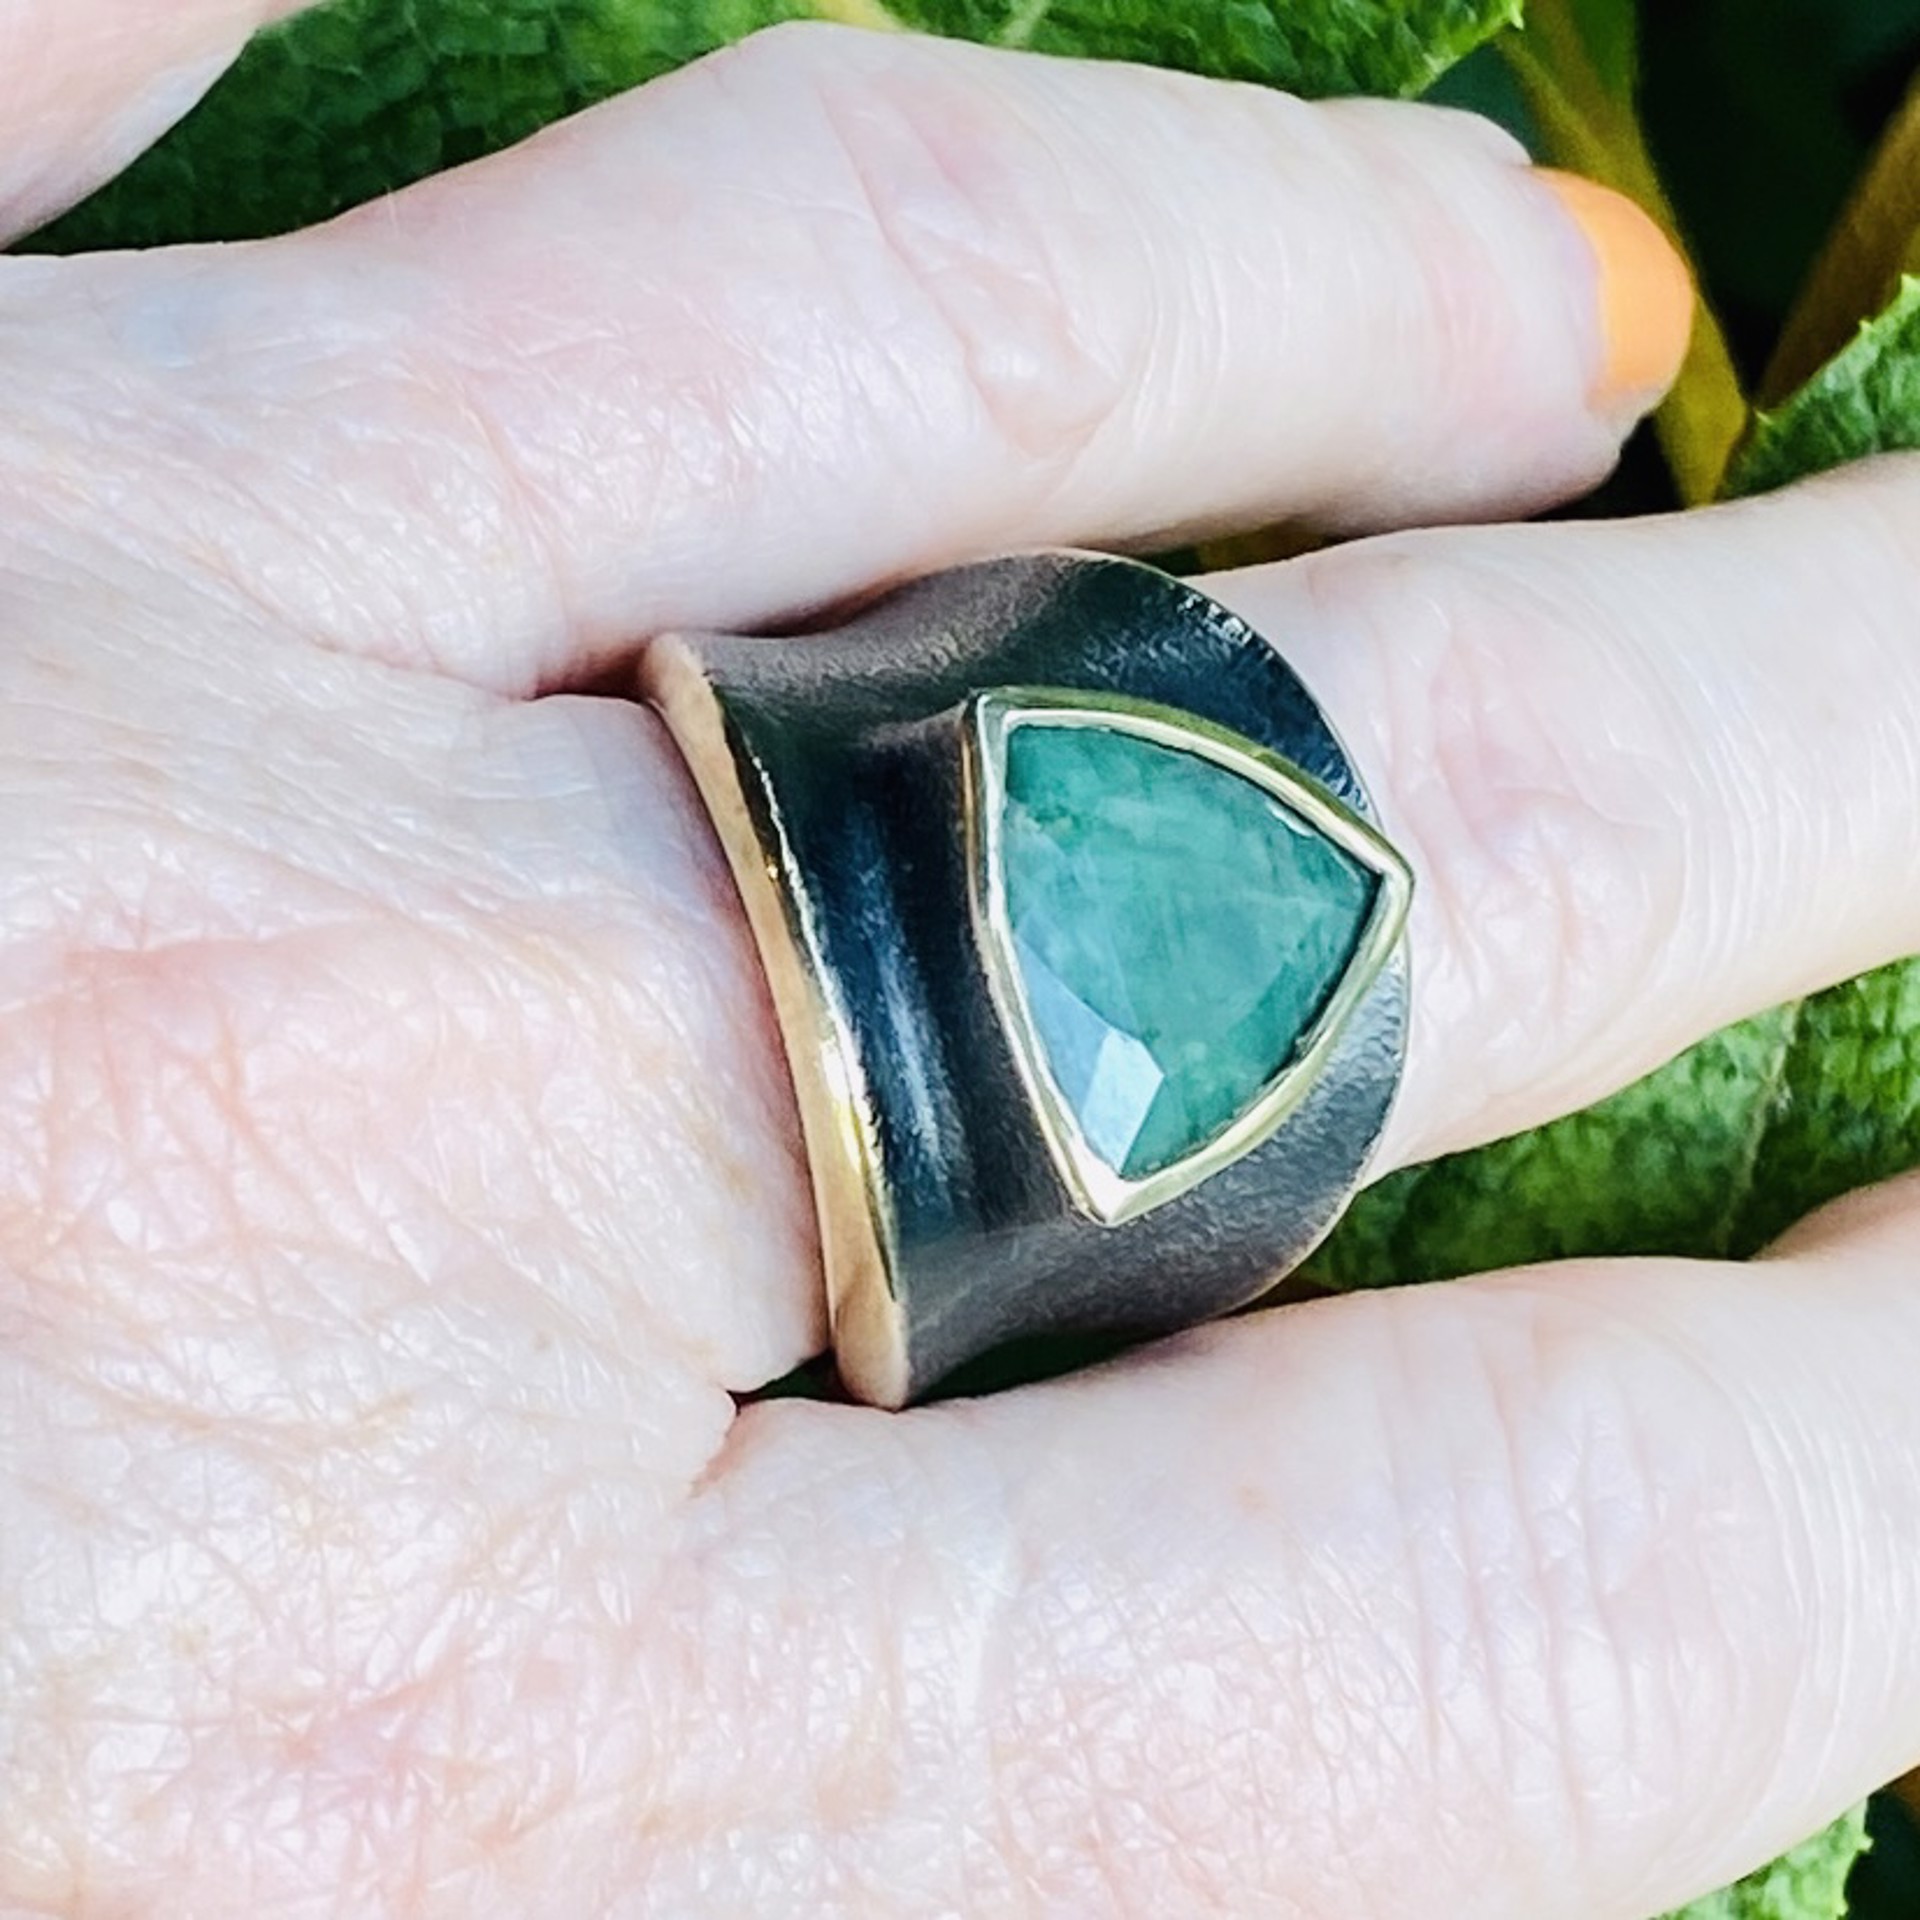 Large Faceted Indian Emerald Oxidized Wide Band Ring sz10 by Bora